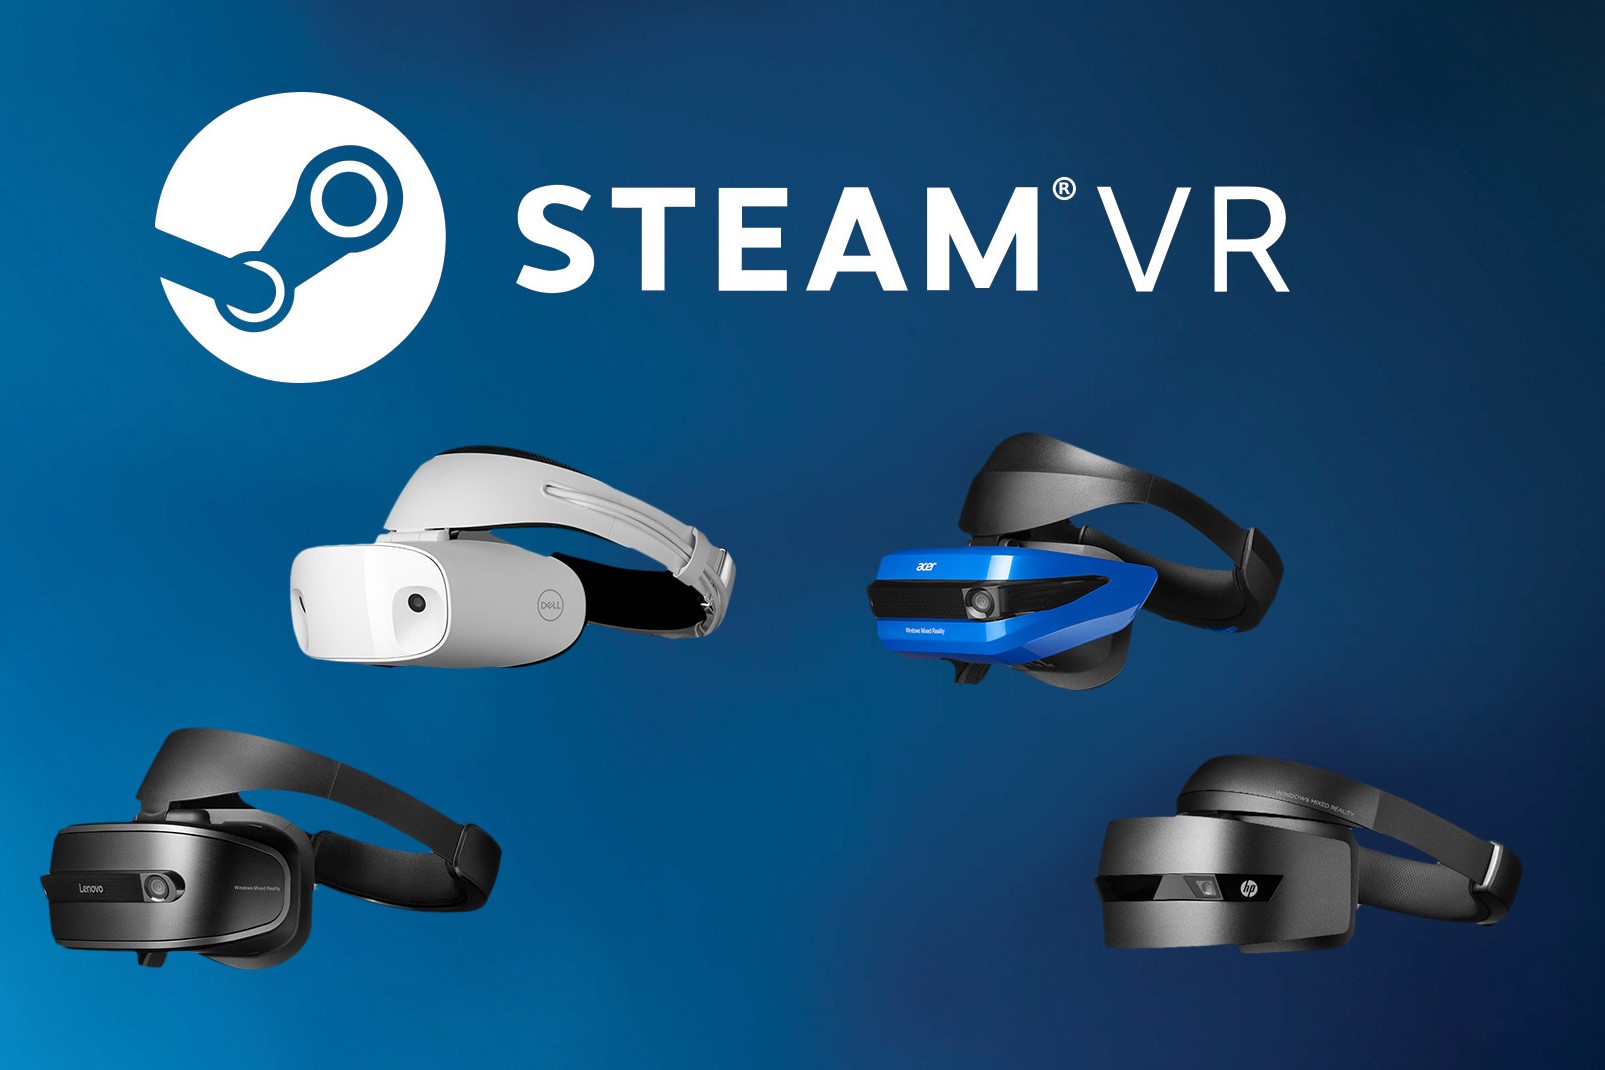 Why Does SteamVR Have Better Games Than Oculus Rift